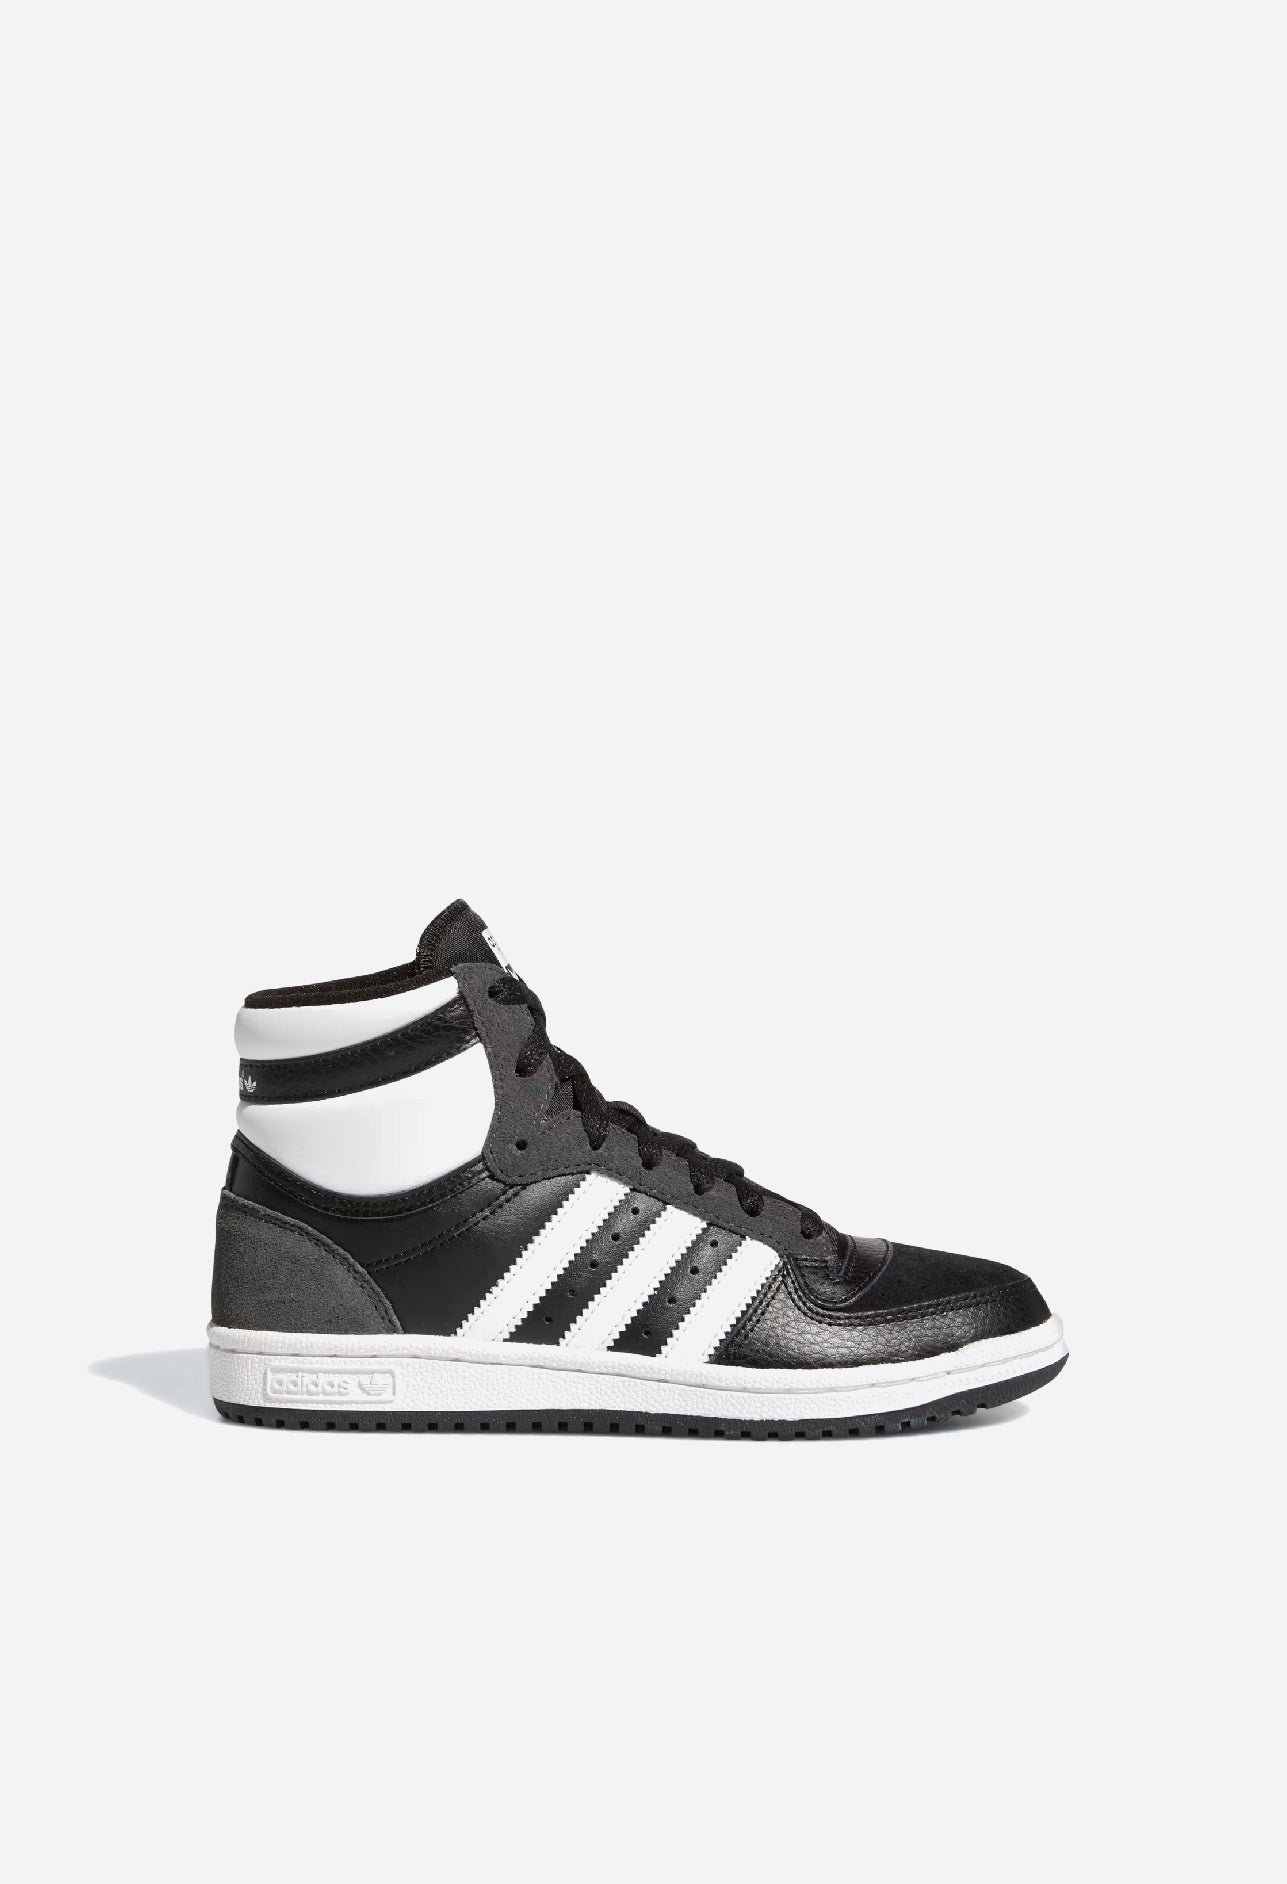 Adidas Top Ten RB Shoes (GS)